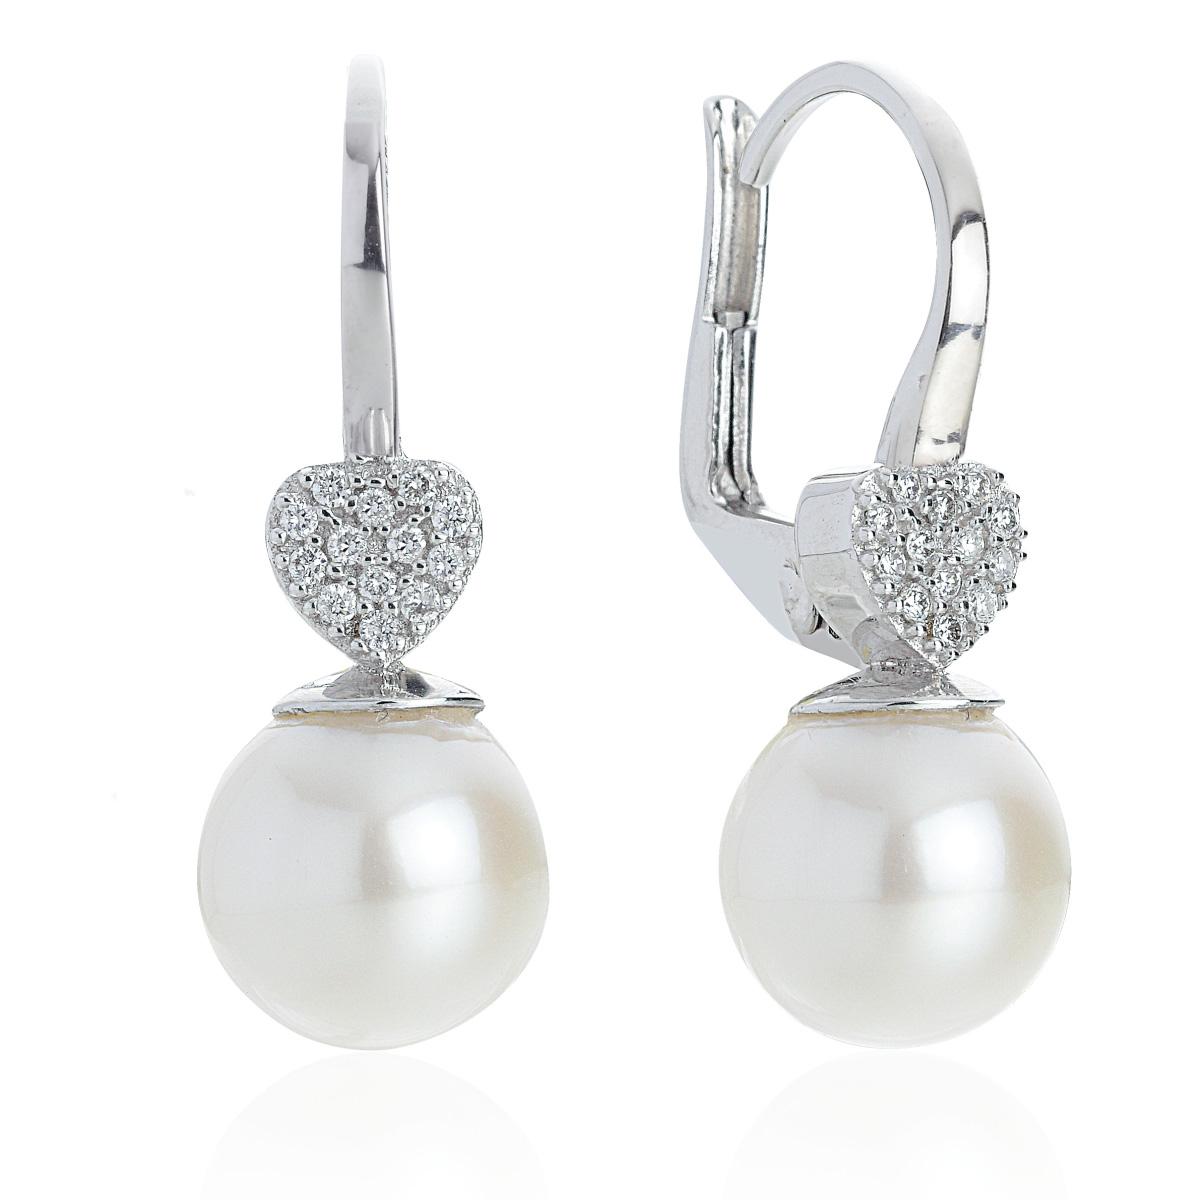 Hook earrings in 18 kt white gold with diamonds and sea pearls 8.50-9 mm - OD389-LB